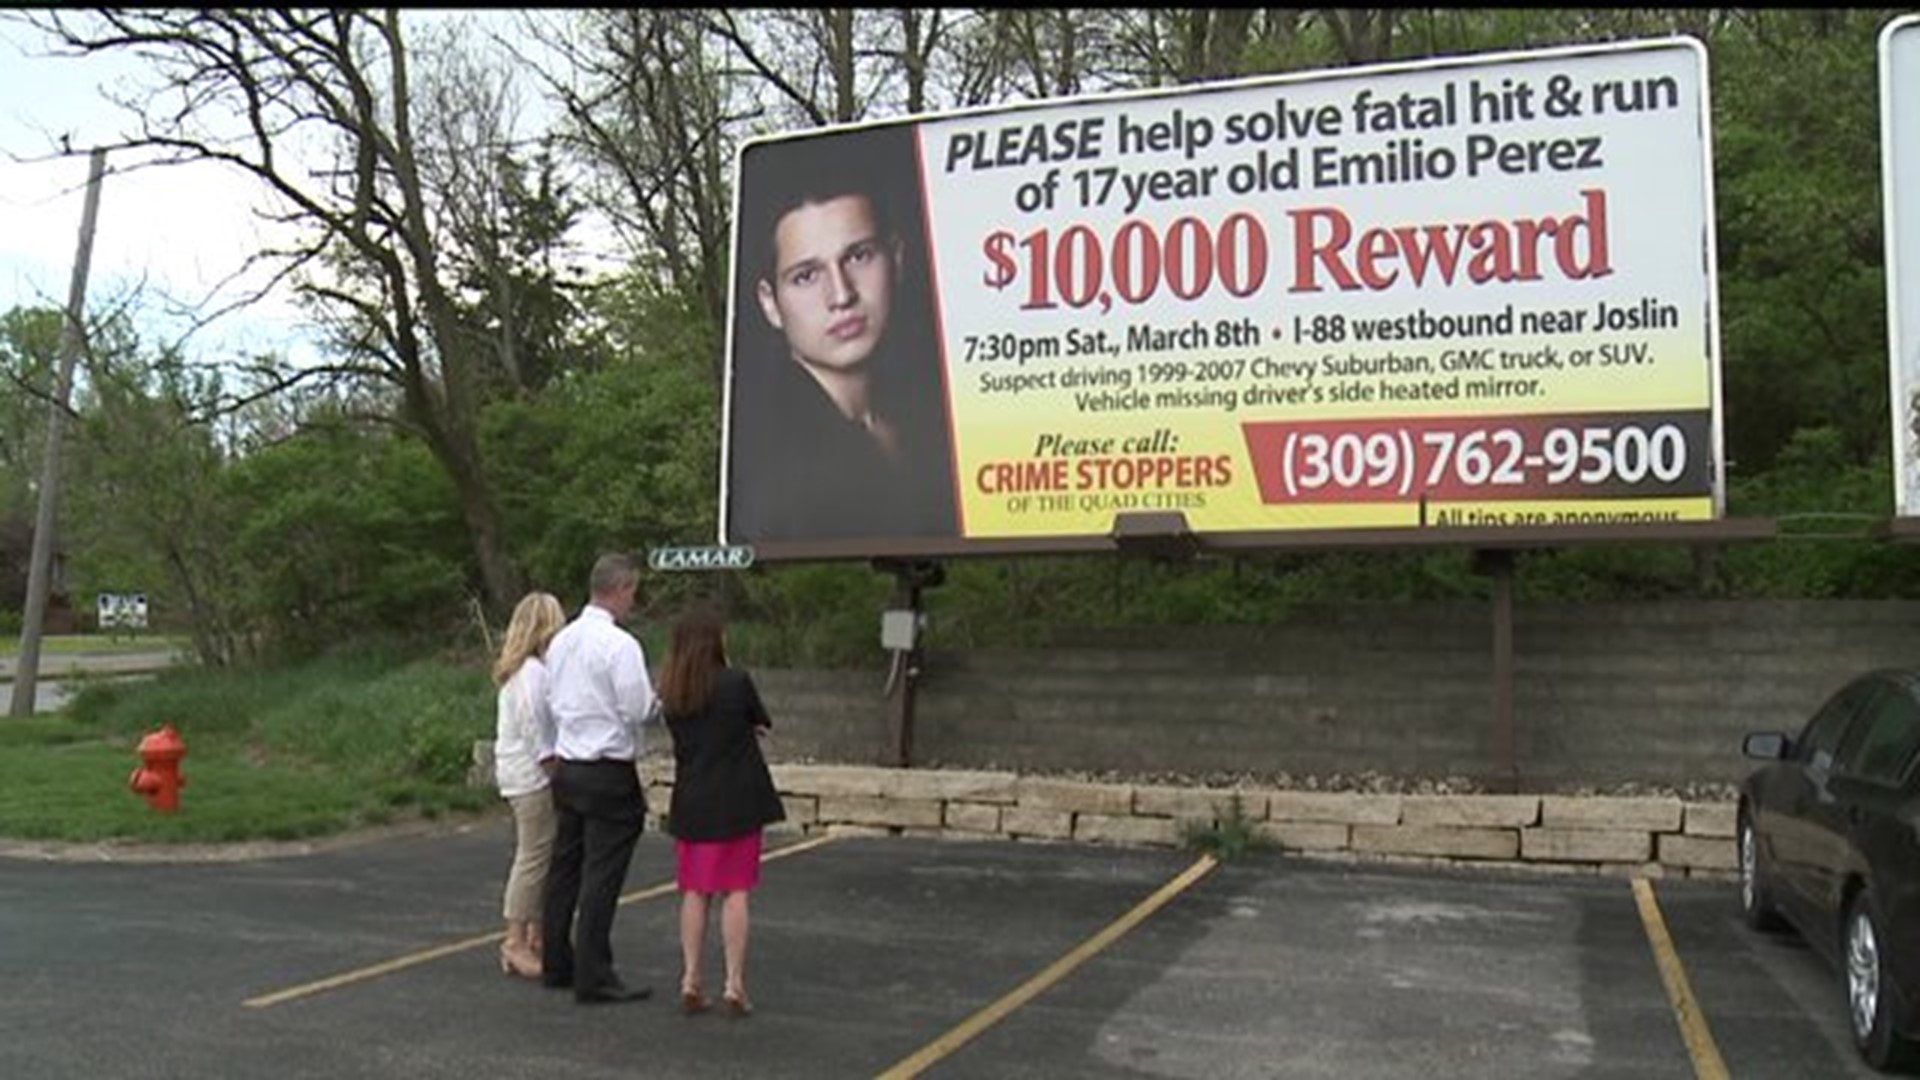 Investigators release new information hoping for leads in fatal hit and run